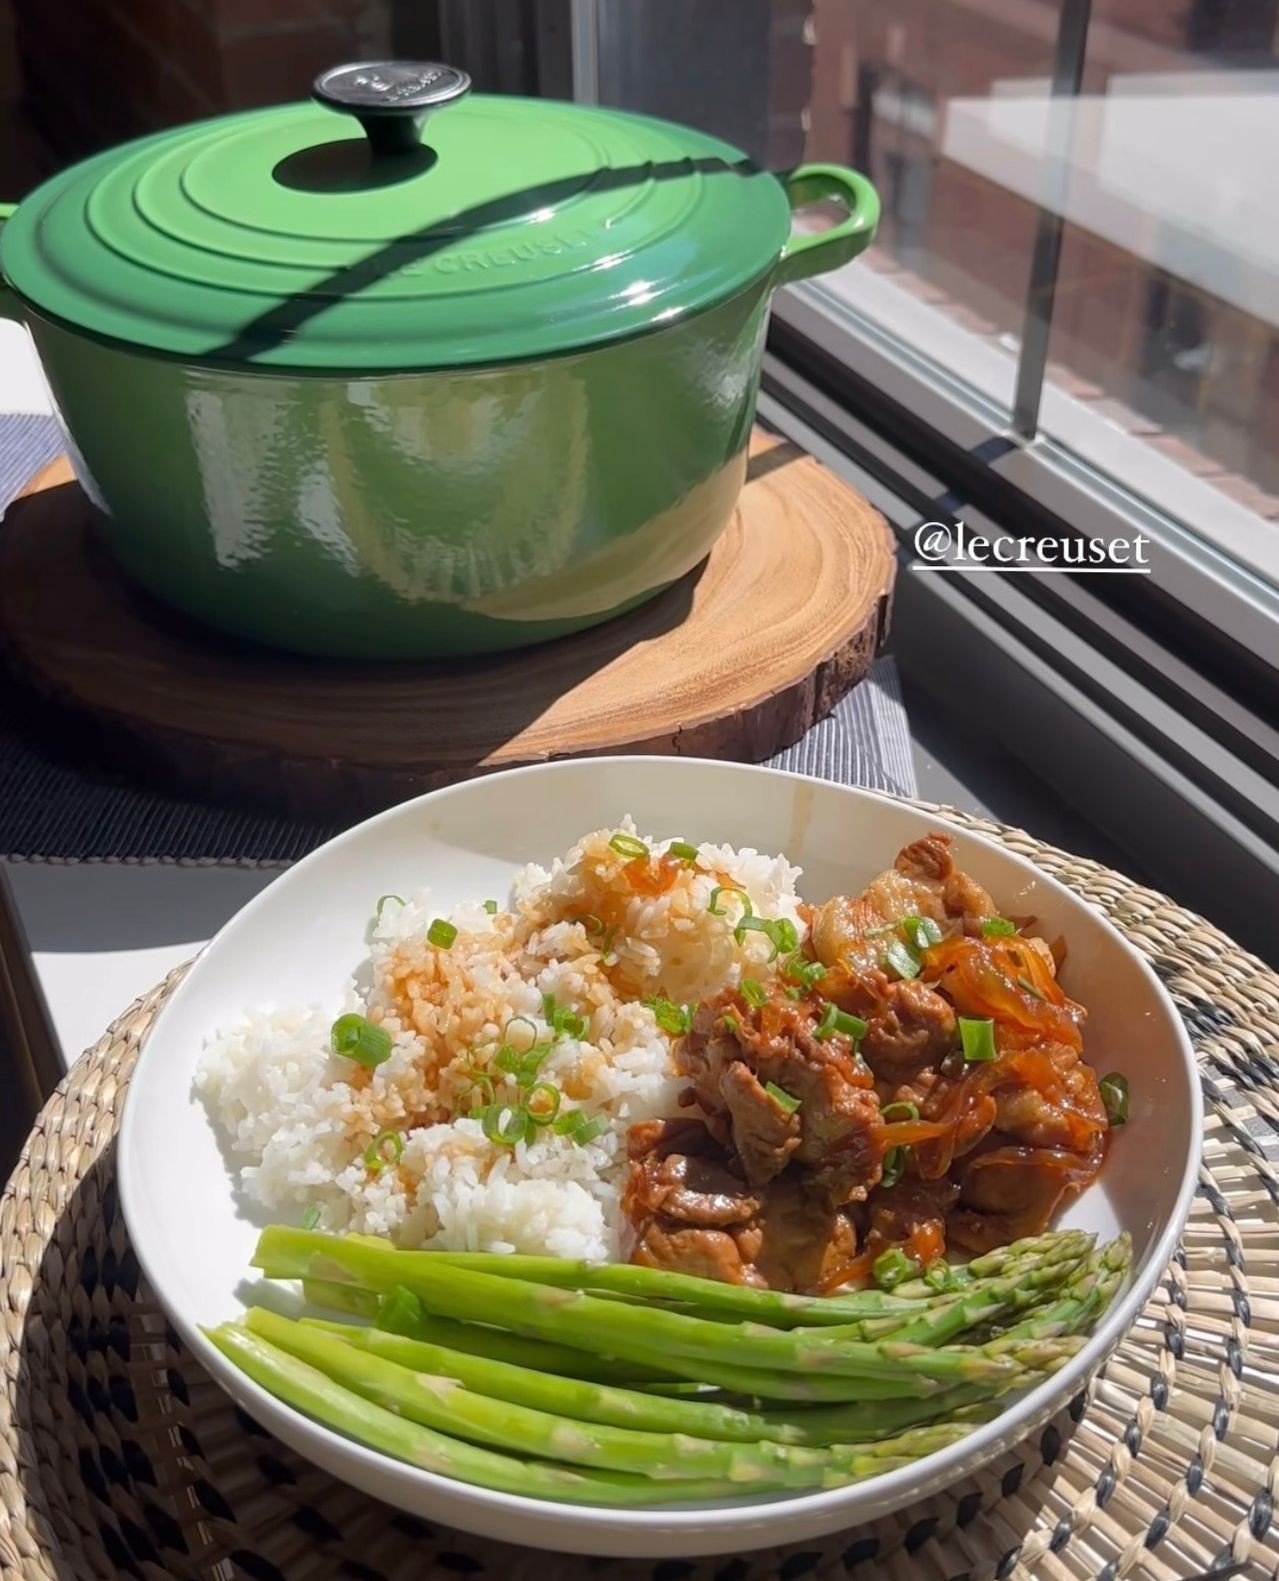 Another @lecreuset launch under our belts 😤⁠
⁠
Last month, our team worked with Le Creuset team to launch their new Bamboo colored ovens, working with content creators from targeted markets across the US. Some great reels, yummy recipes and solid en